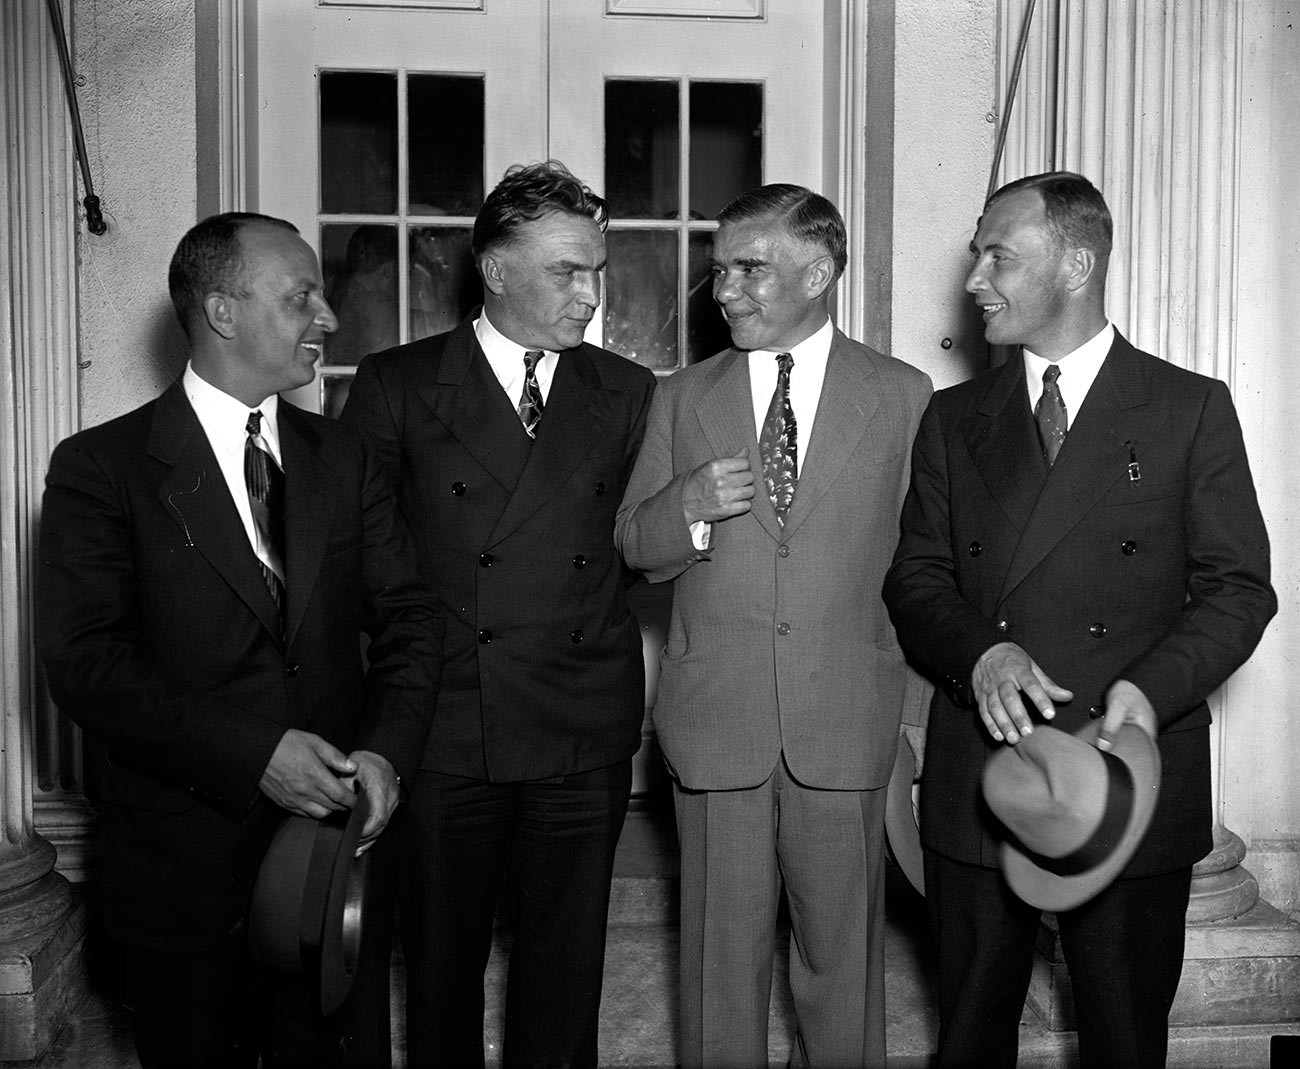 The Soviet pilots after the meeting with the U.S. President in the White House.